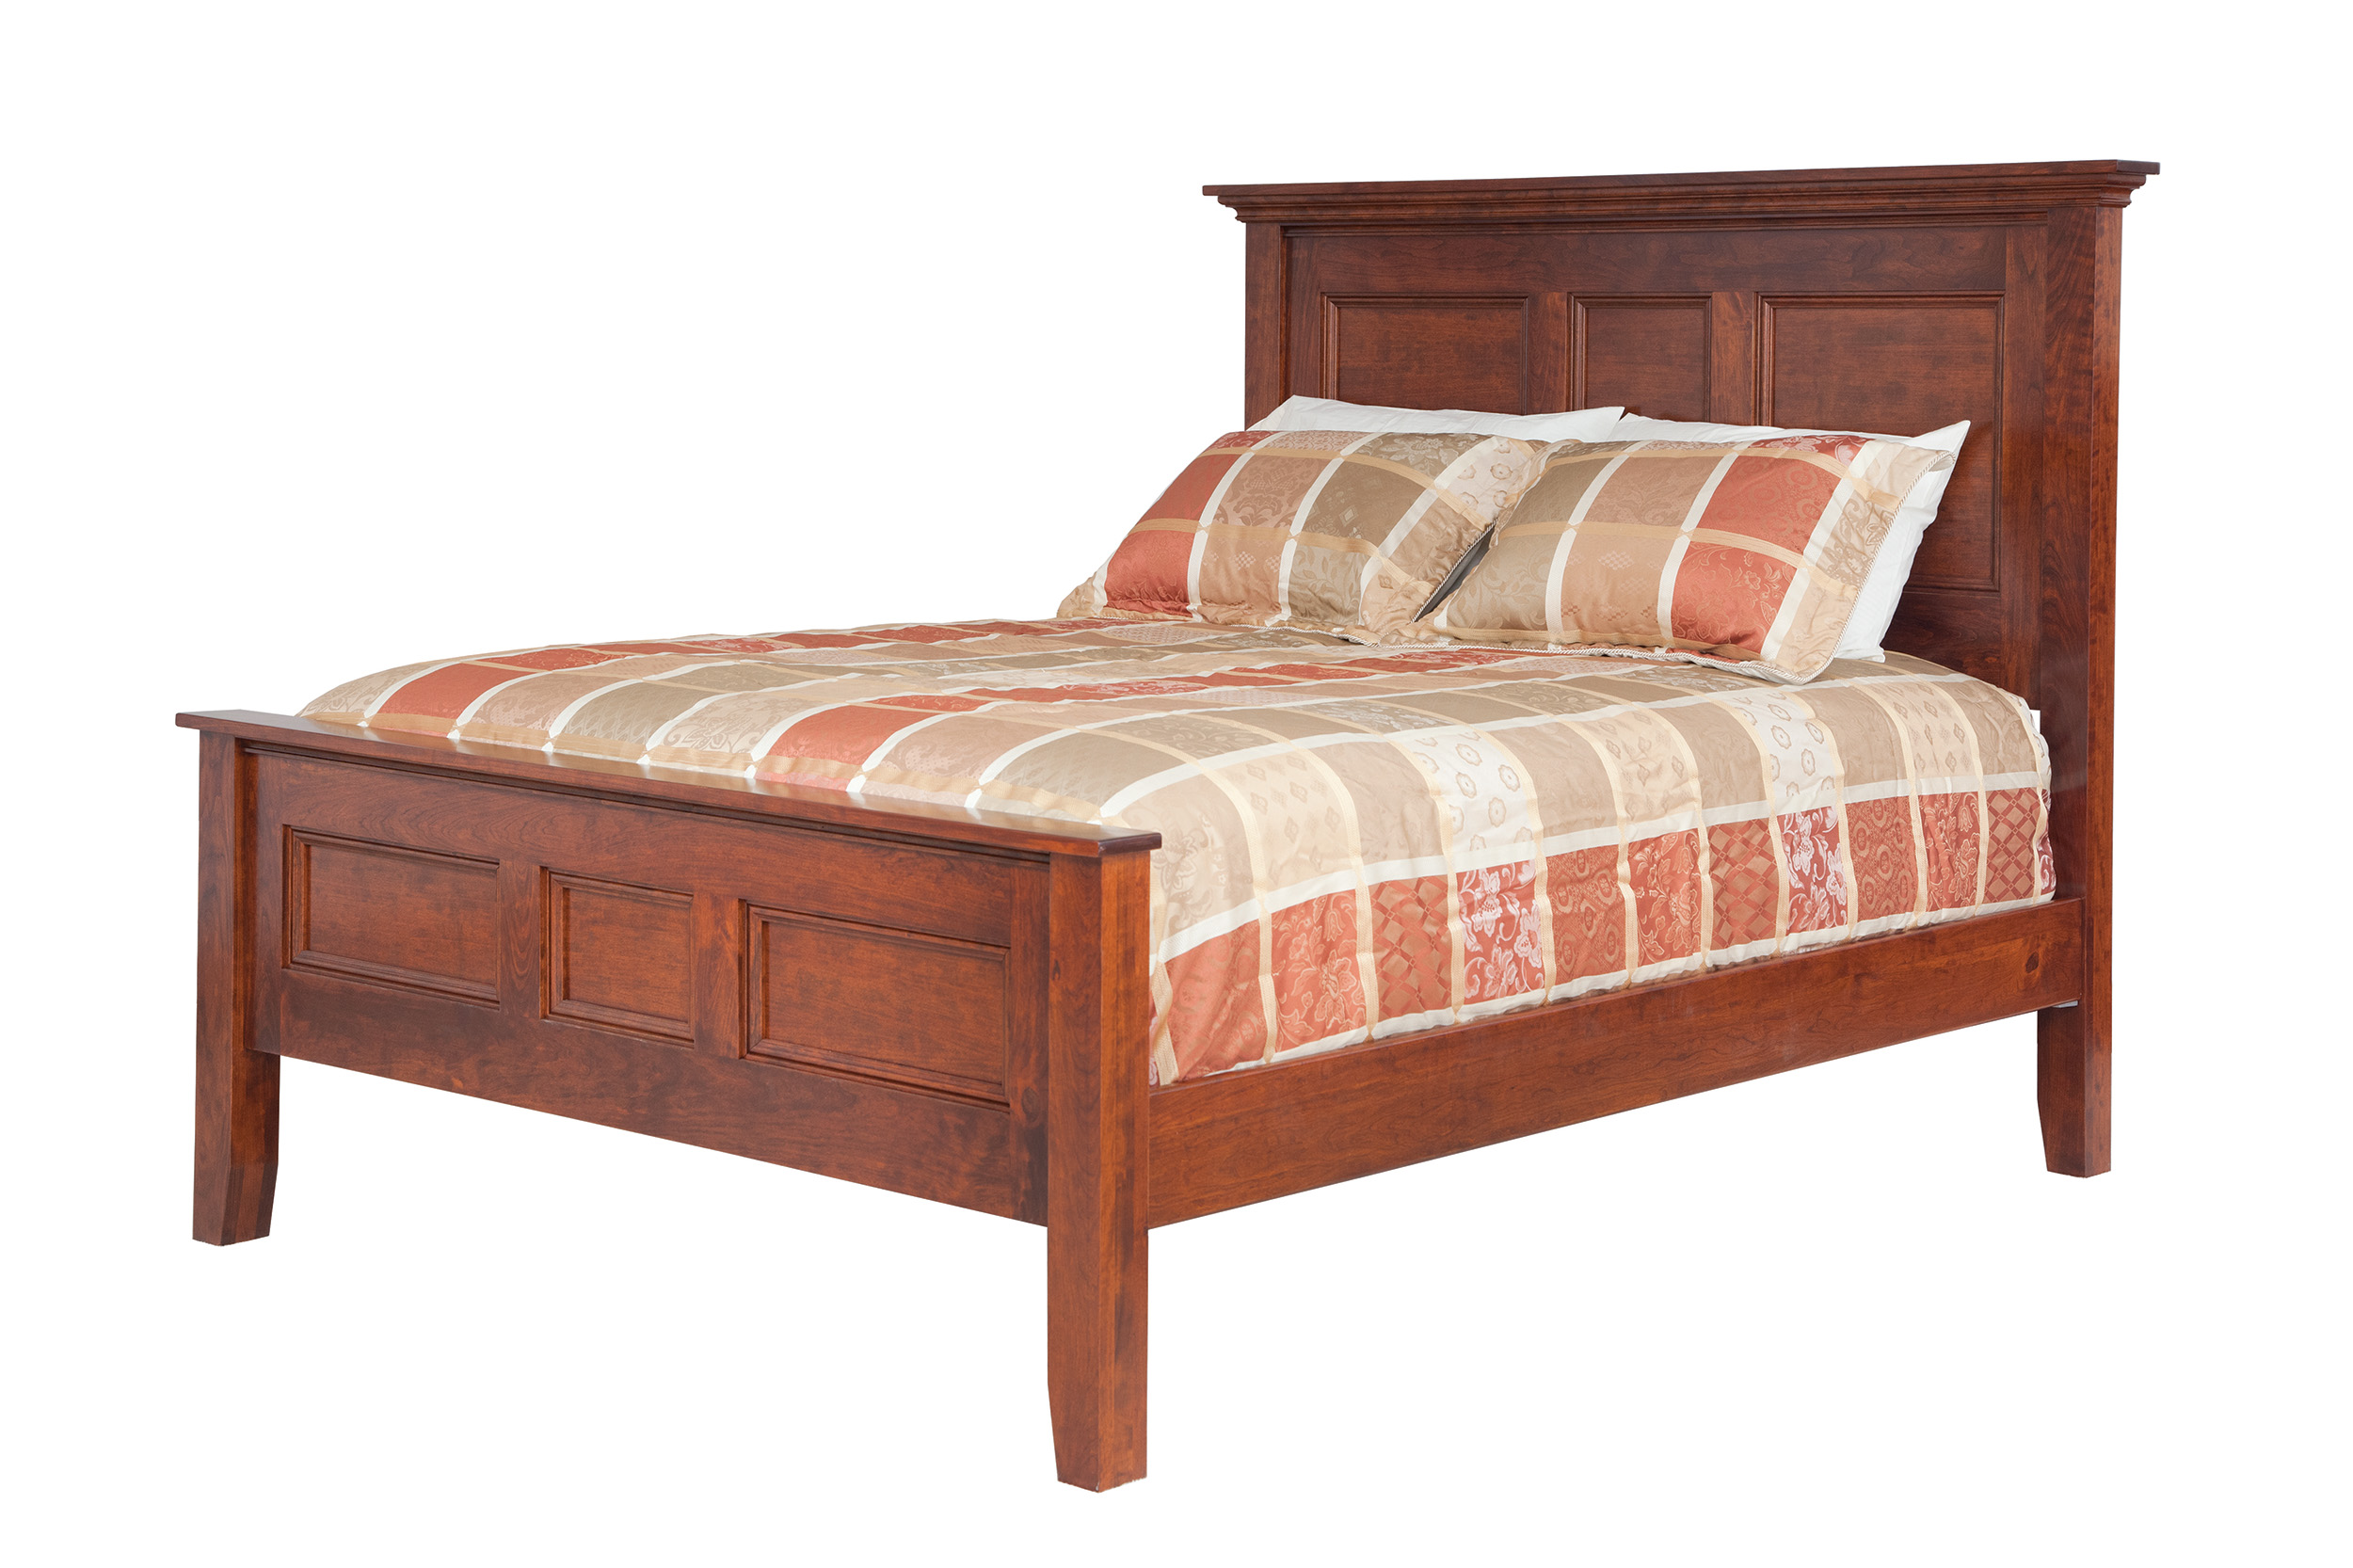 Criswell Furniture